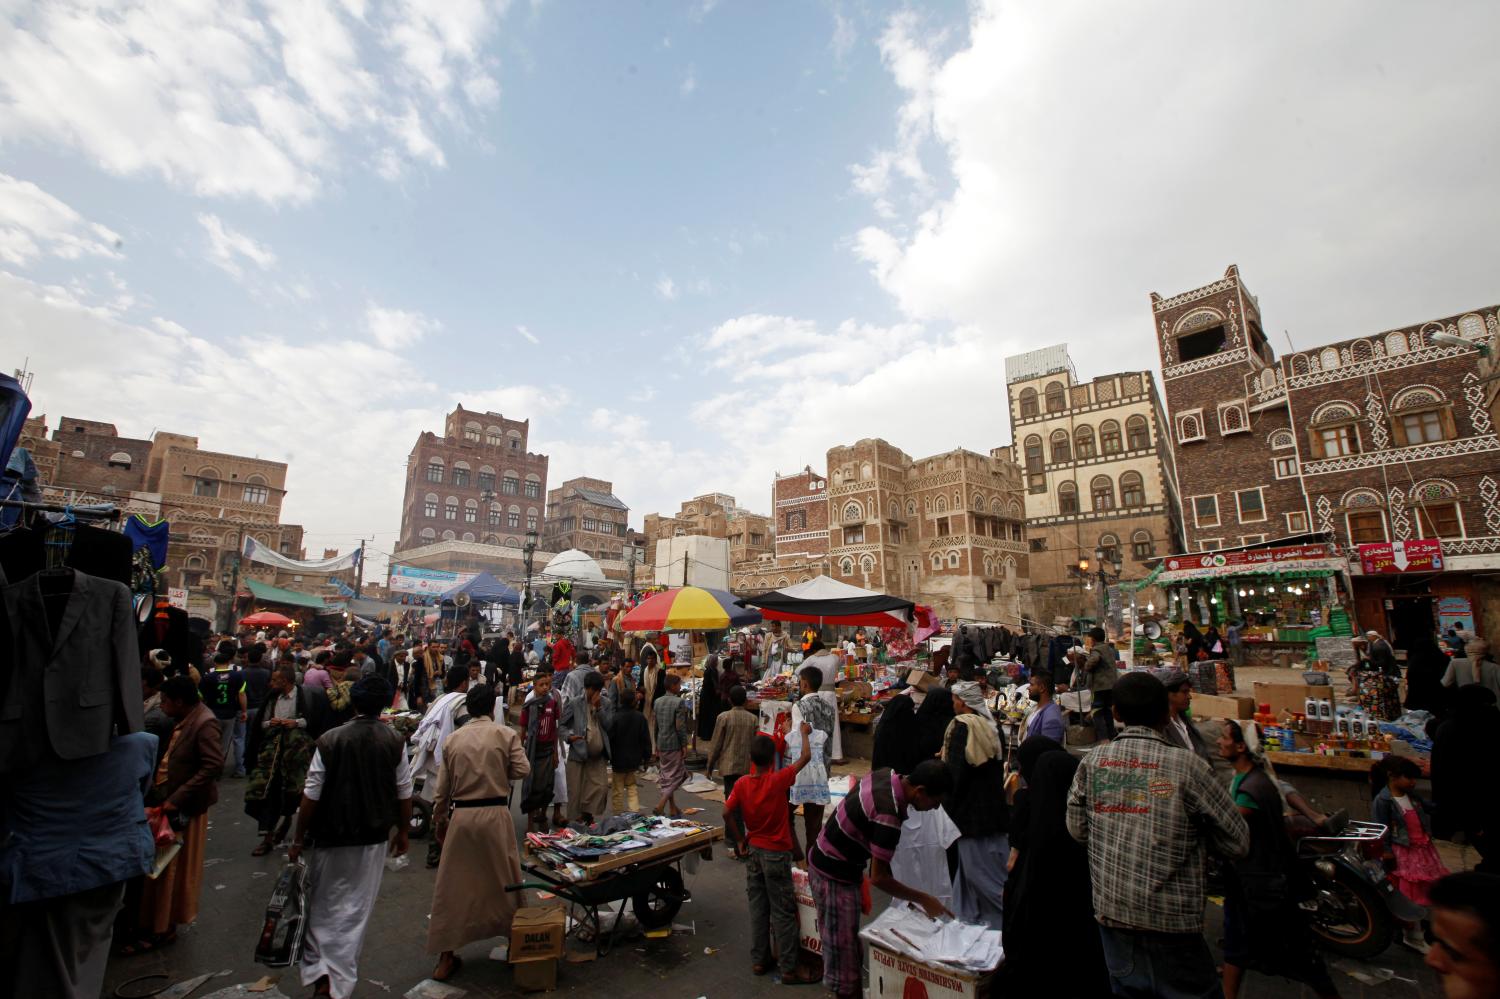 People browse items at the old market, ahead of the Eid Al-Adha festival, in the historic city of Sanaa, Yemen September 11, 2016. REUTERS/Mohamed al-Sayaghi - RTSN91T